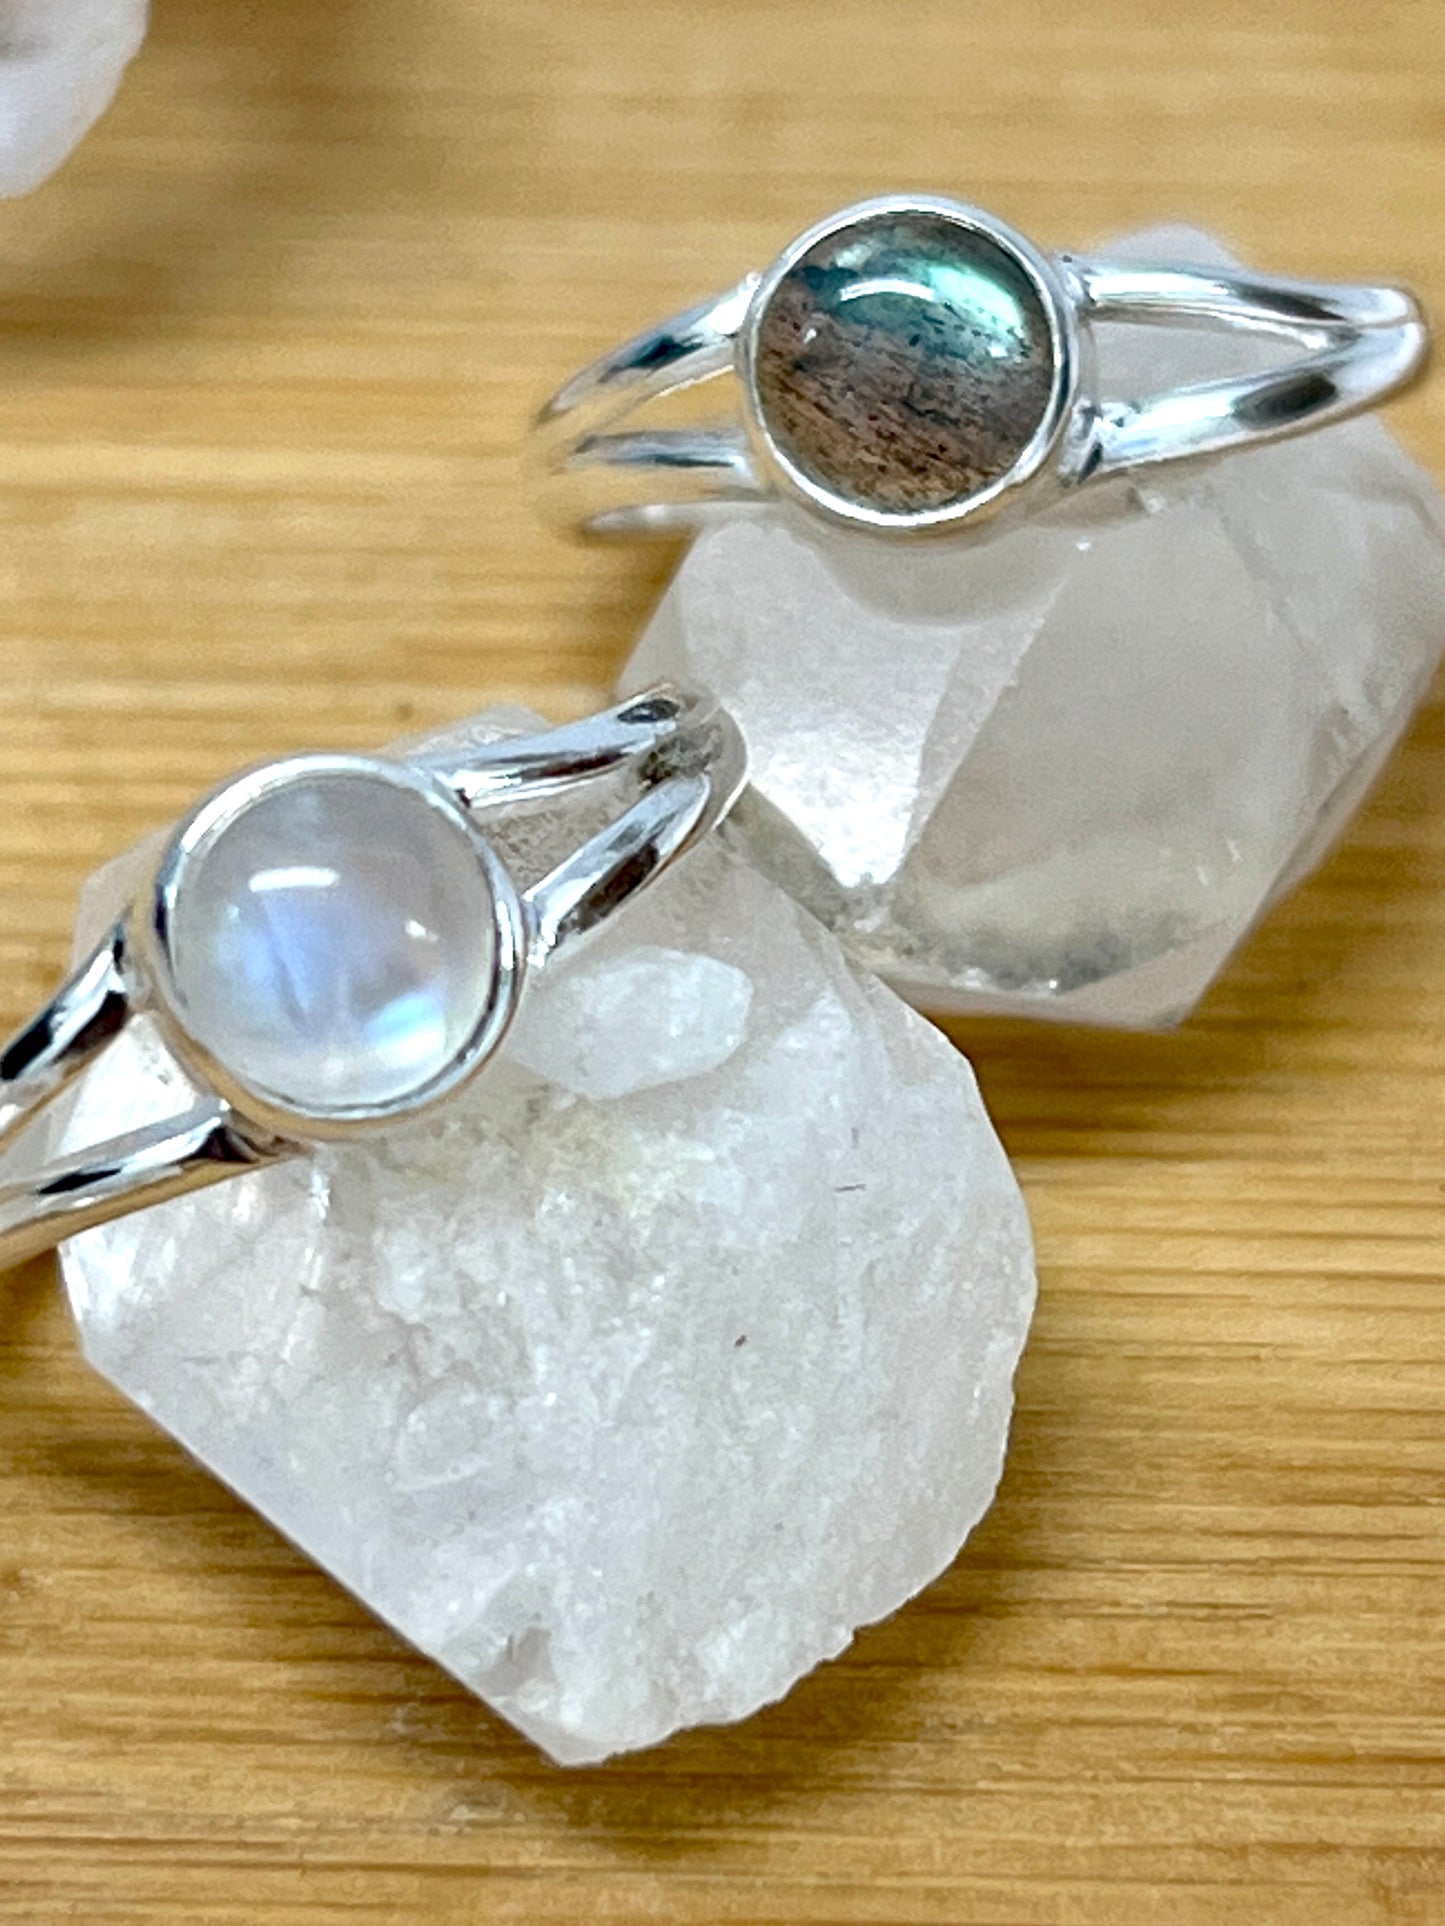 Two Circular Minimalist Stone Rings by Super Silver on top of a rock.